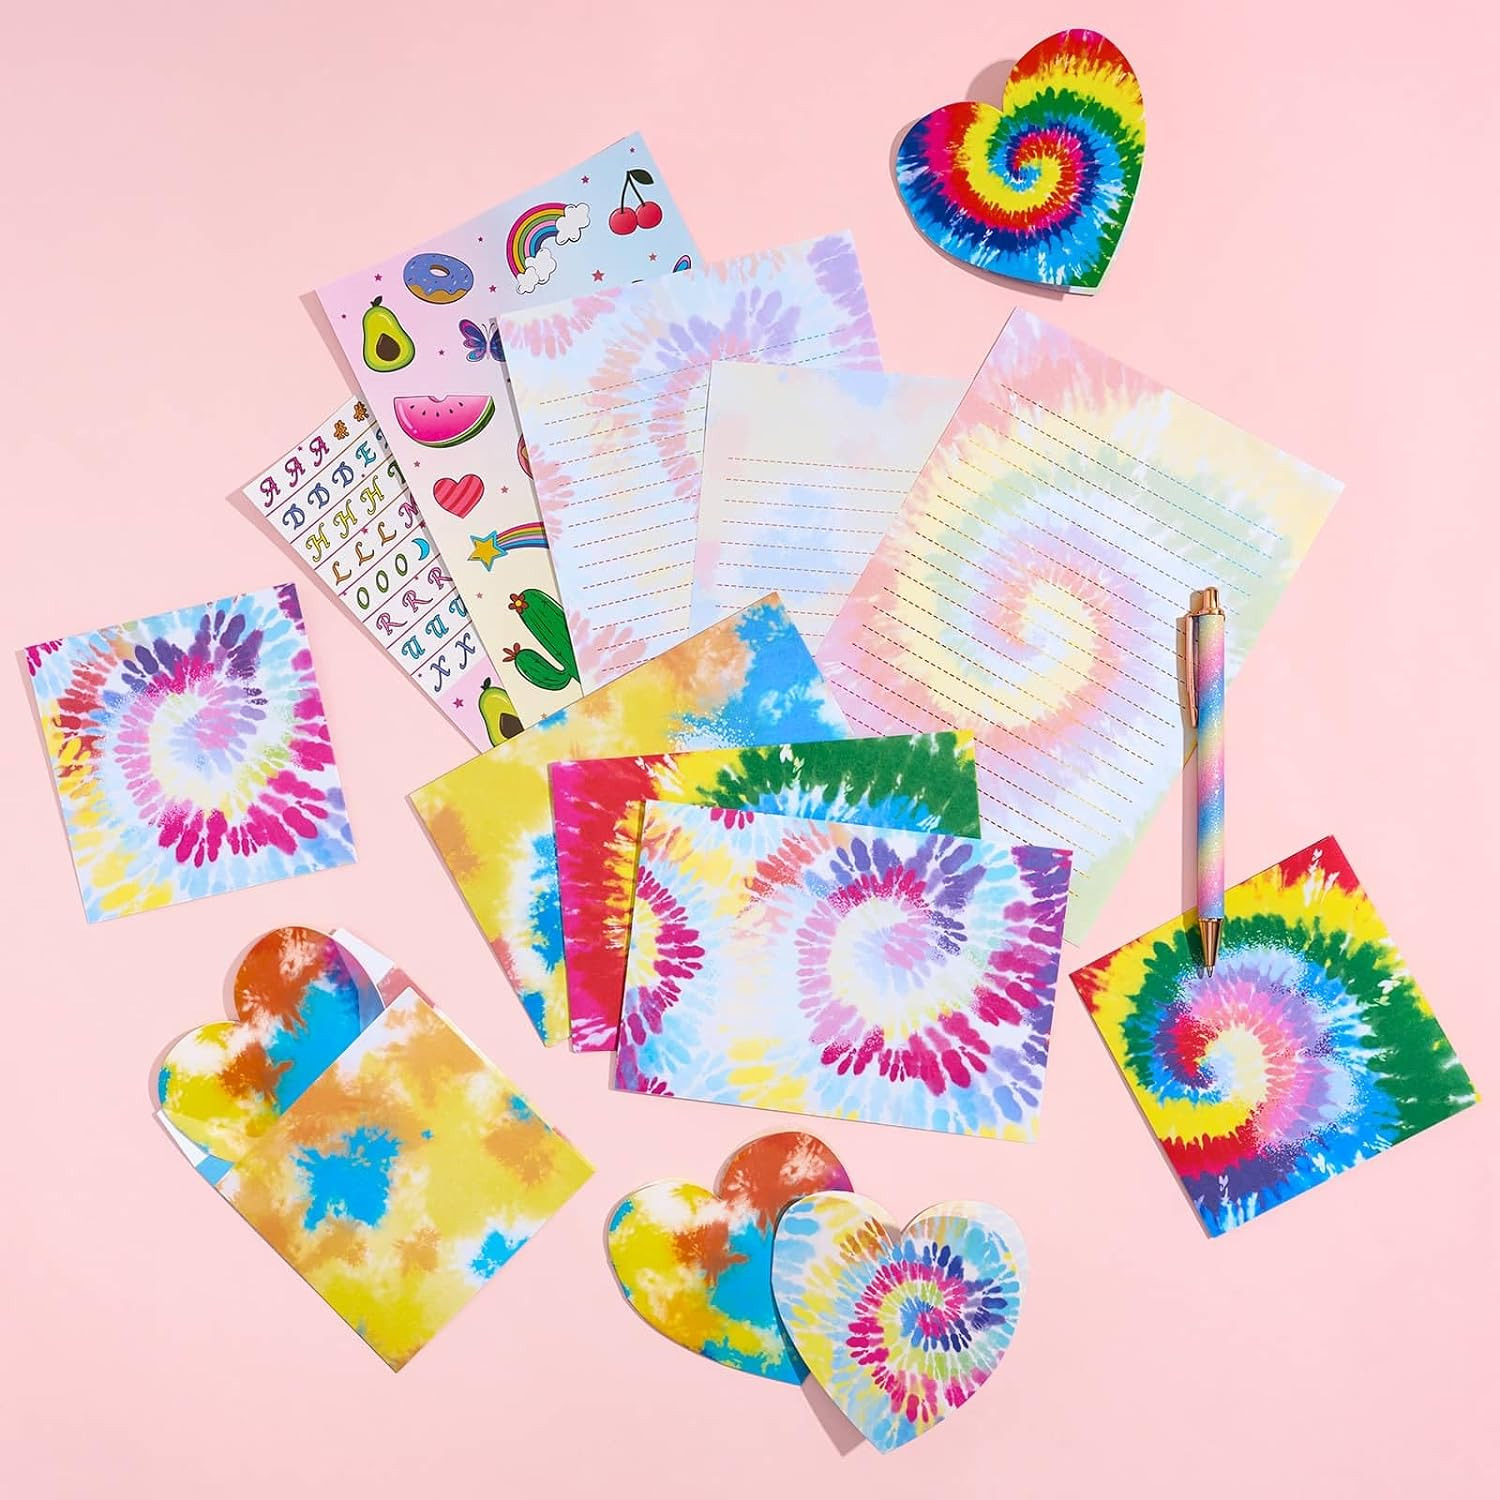 Tie Dyed Stationery Set - 69 PCS Rainbow Girls Stationery Paper with Lines Lette